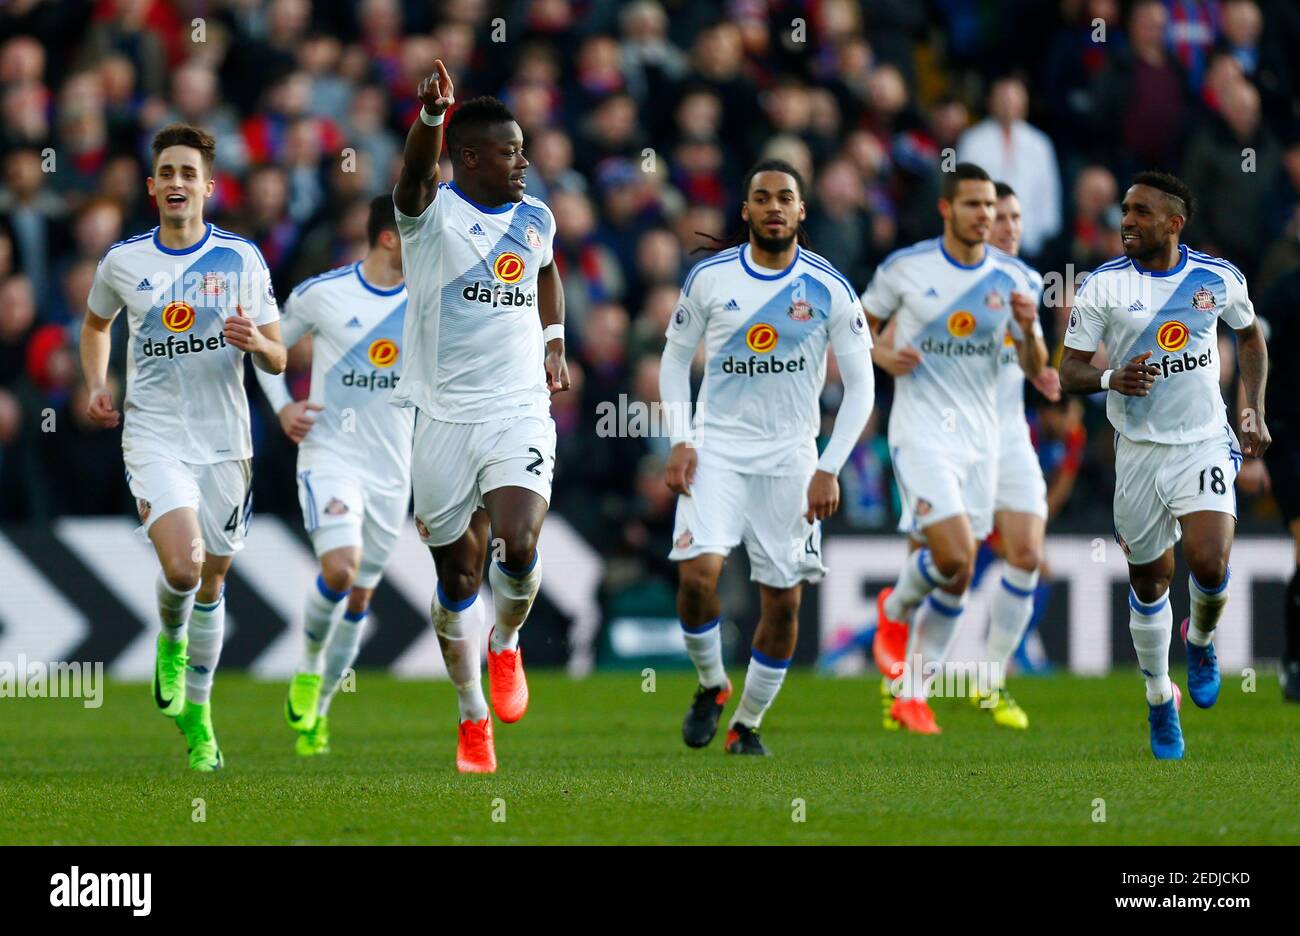 Britain Football Soccer - Crystal Palace v Sunderland - Premier League - Selhurst Park - 4/2/17 Sunderland's Lamine Kone celebrates scoring their first goal Reuters / Andrew Winning Livepic EDITORIAL USE ONLY. No use with unauthorized audio, video, data, fixture lists, club/league logos or 'live' services. Online in-match use limited to 45 images, no video emulation. No use in betting, games or single club/league/player publications.  Please contact your account representative for further details. Stock Photo